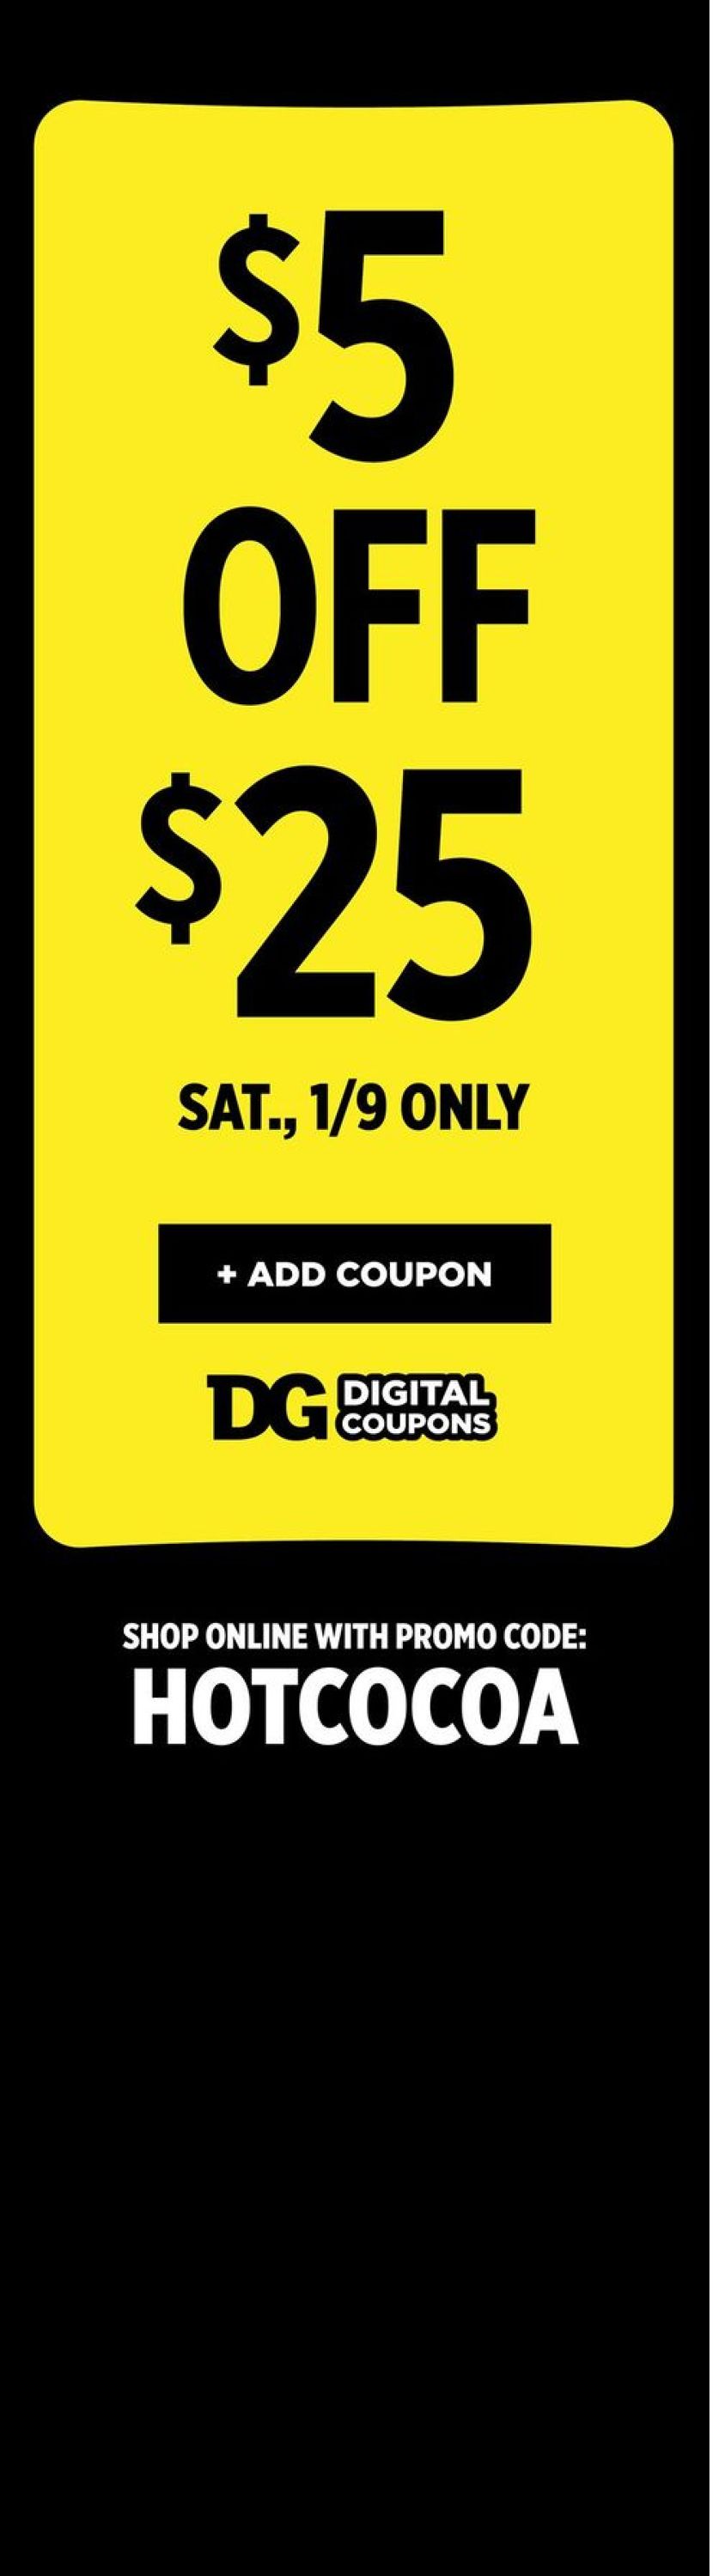 Dollar General Ad from 01/03/2021